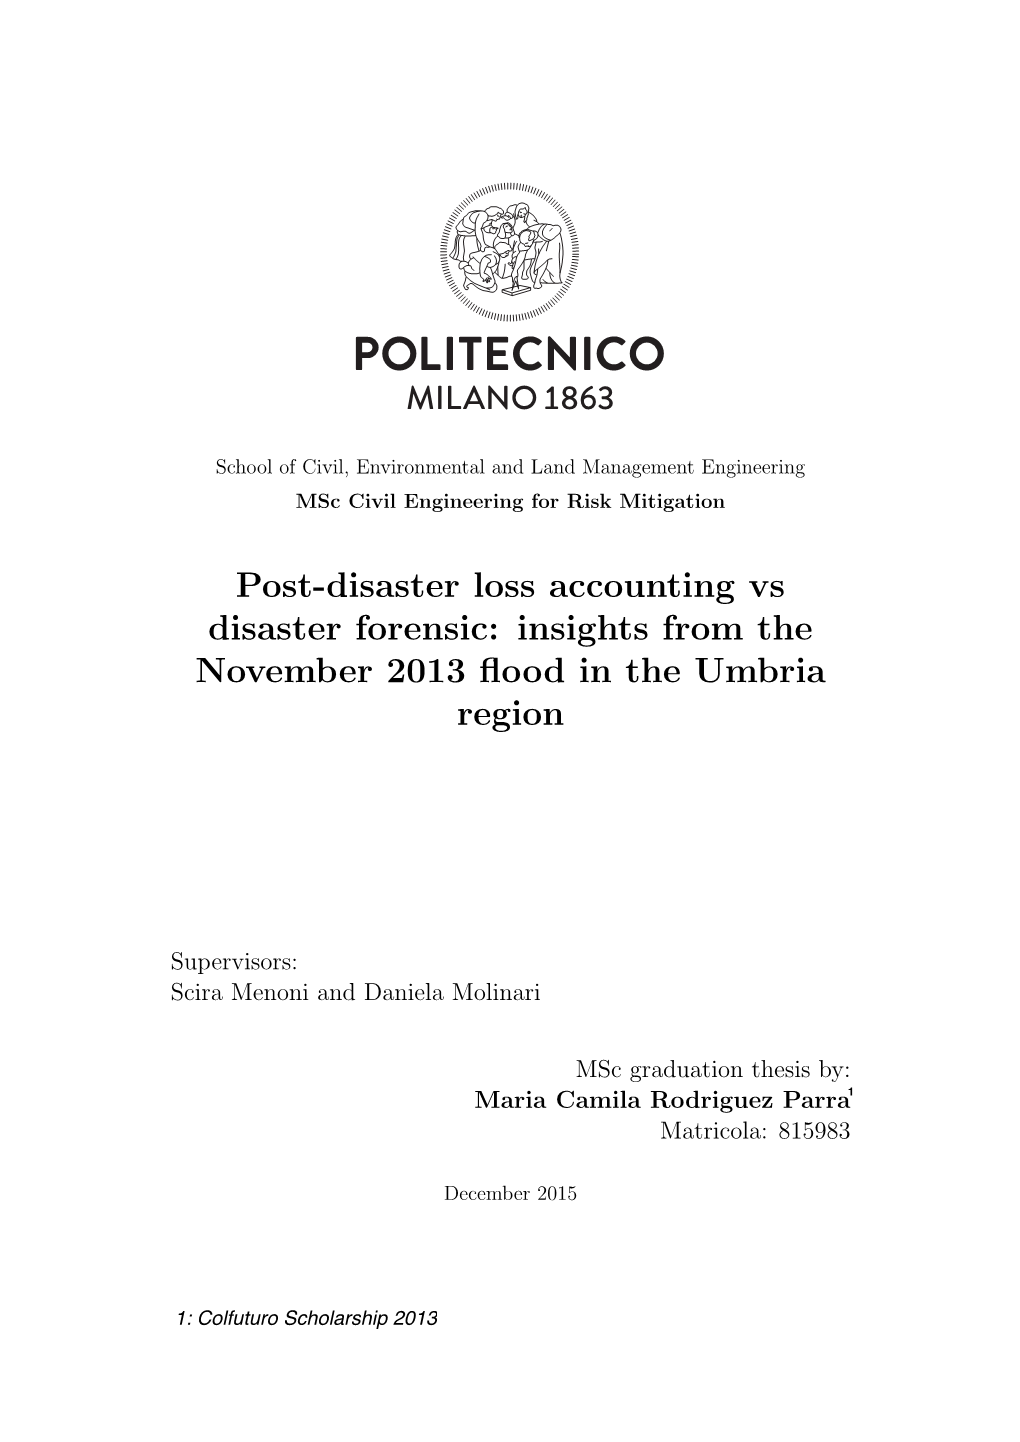 Post-Disaster Loss Accounting Vs Disaster Forensic: Insights from the November 2013 ﬂood in the Umbria Region